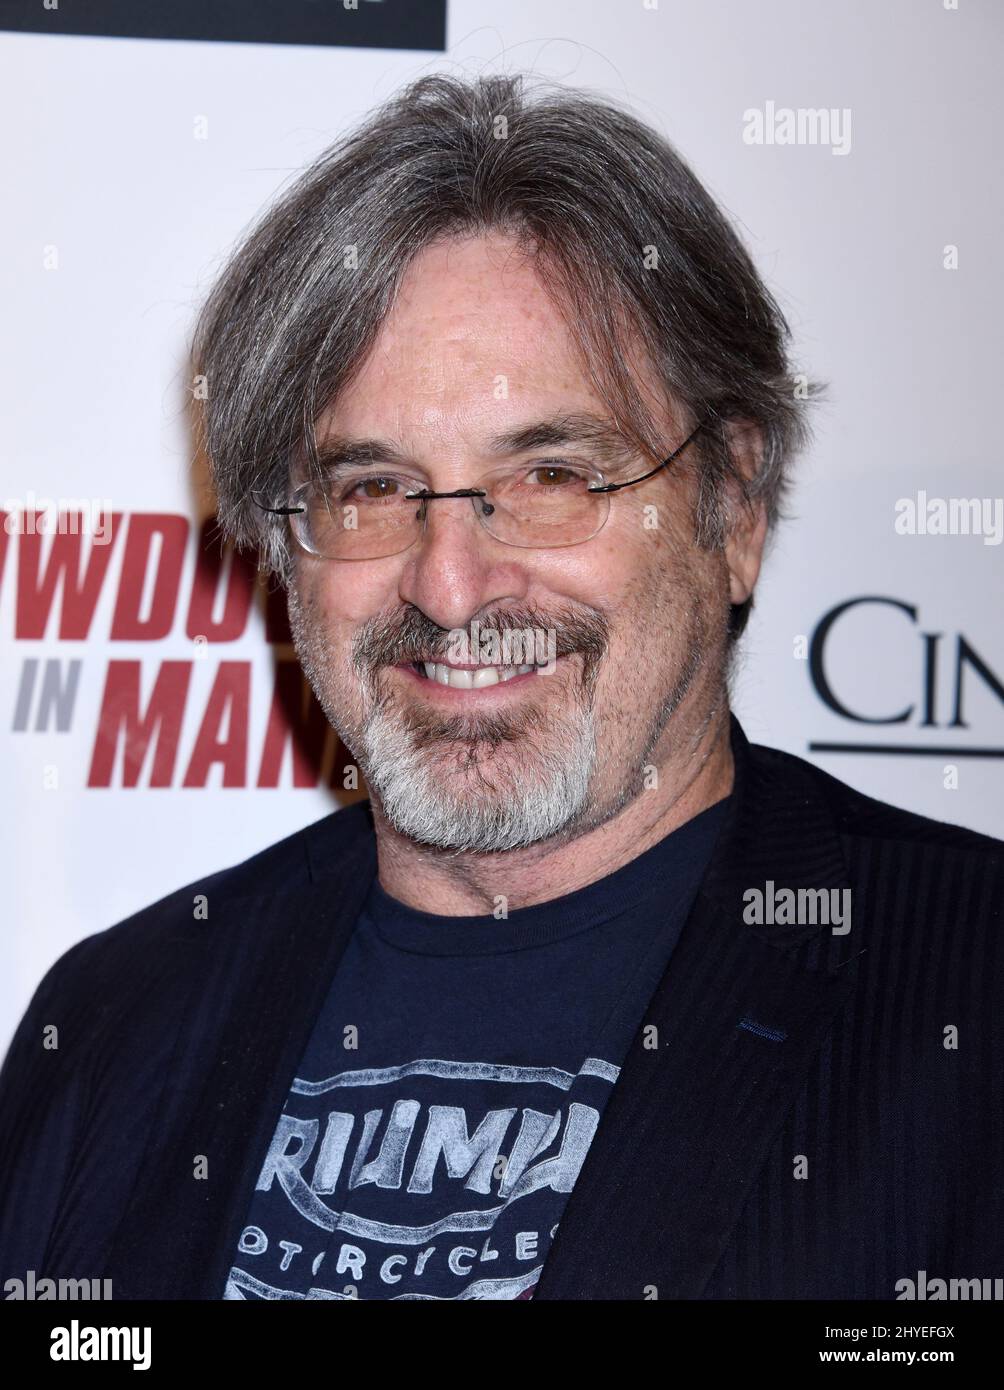 Robert Carradine at ITN Distribution's 'Showdown In Manila' Los Angeles Premiere held at the Laemmle Ahrya Fine Arts Theatre on January 22, 2018 in Beverly Hills, CA. Stock Photo